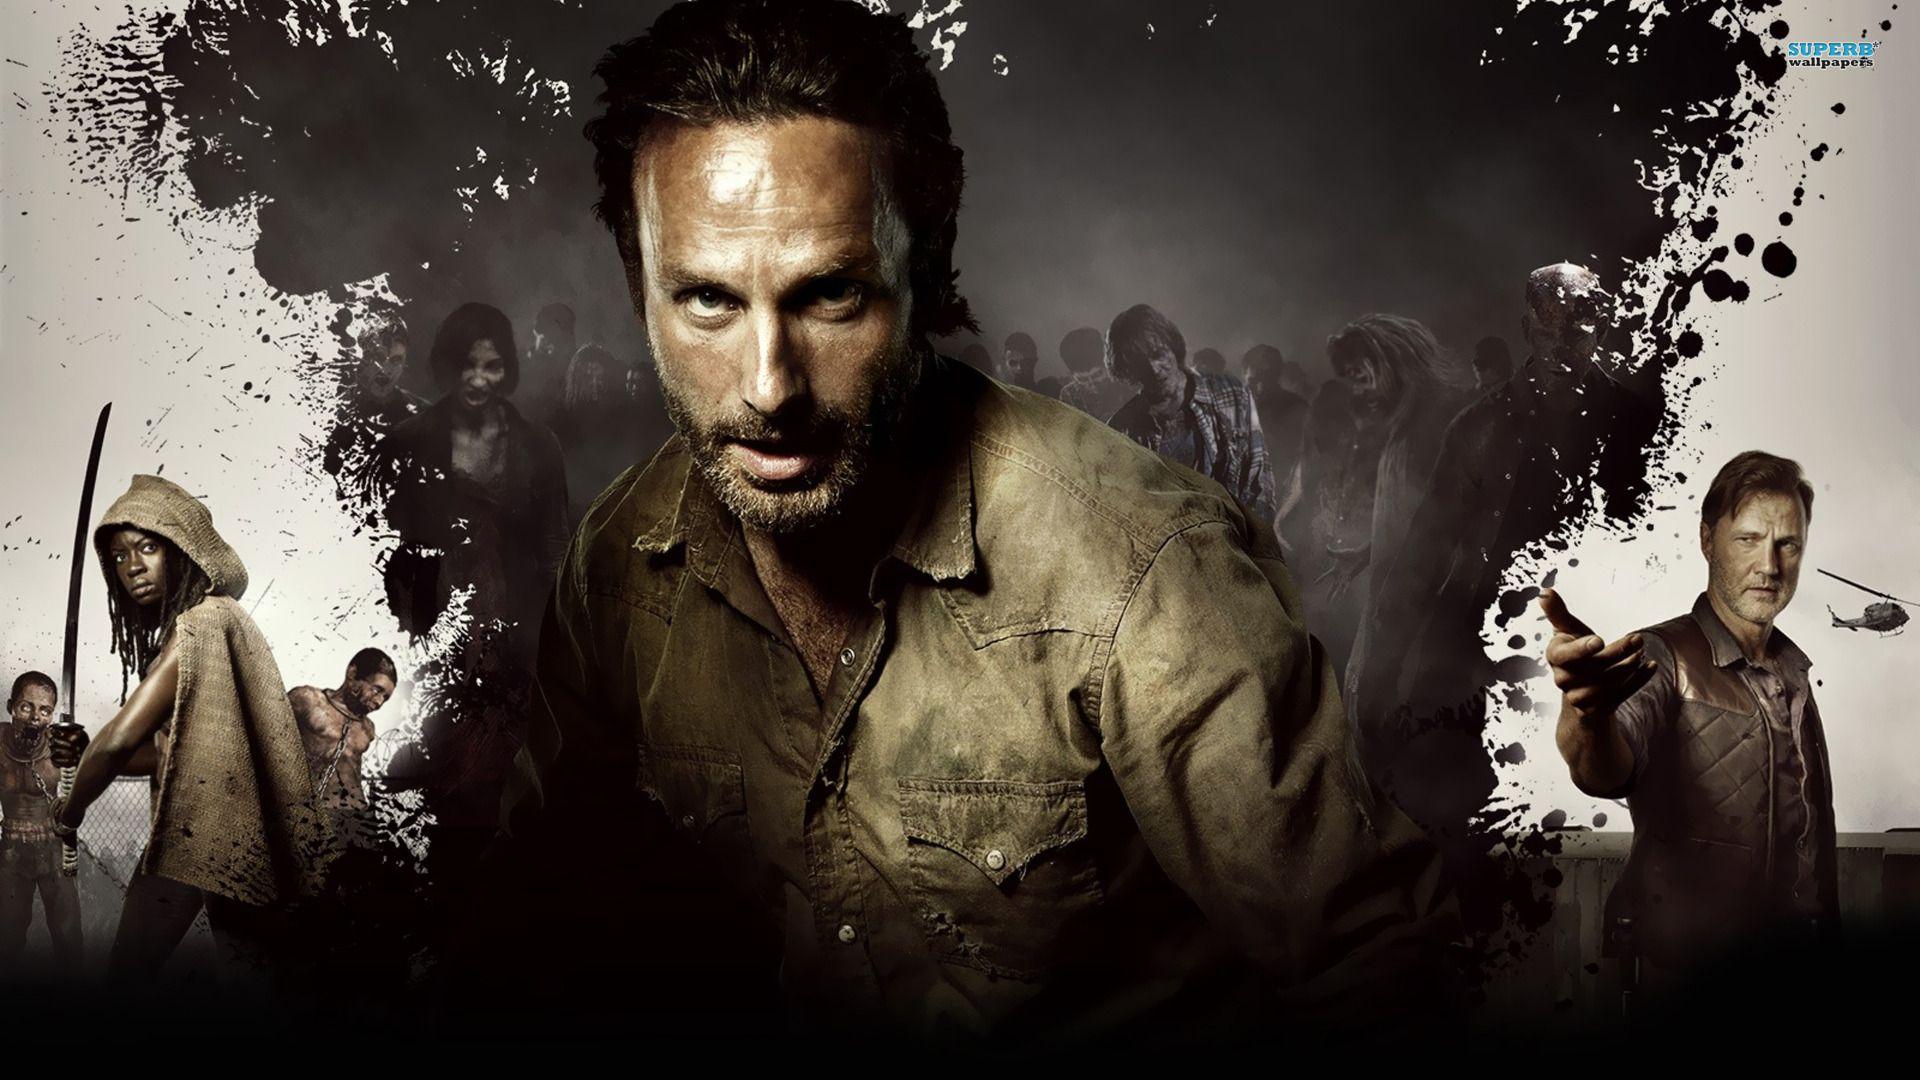 The walking dead wallpaper for android Group 1920×1080 The Walking